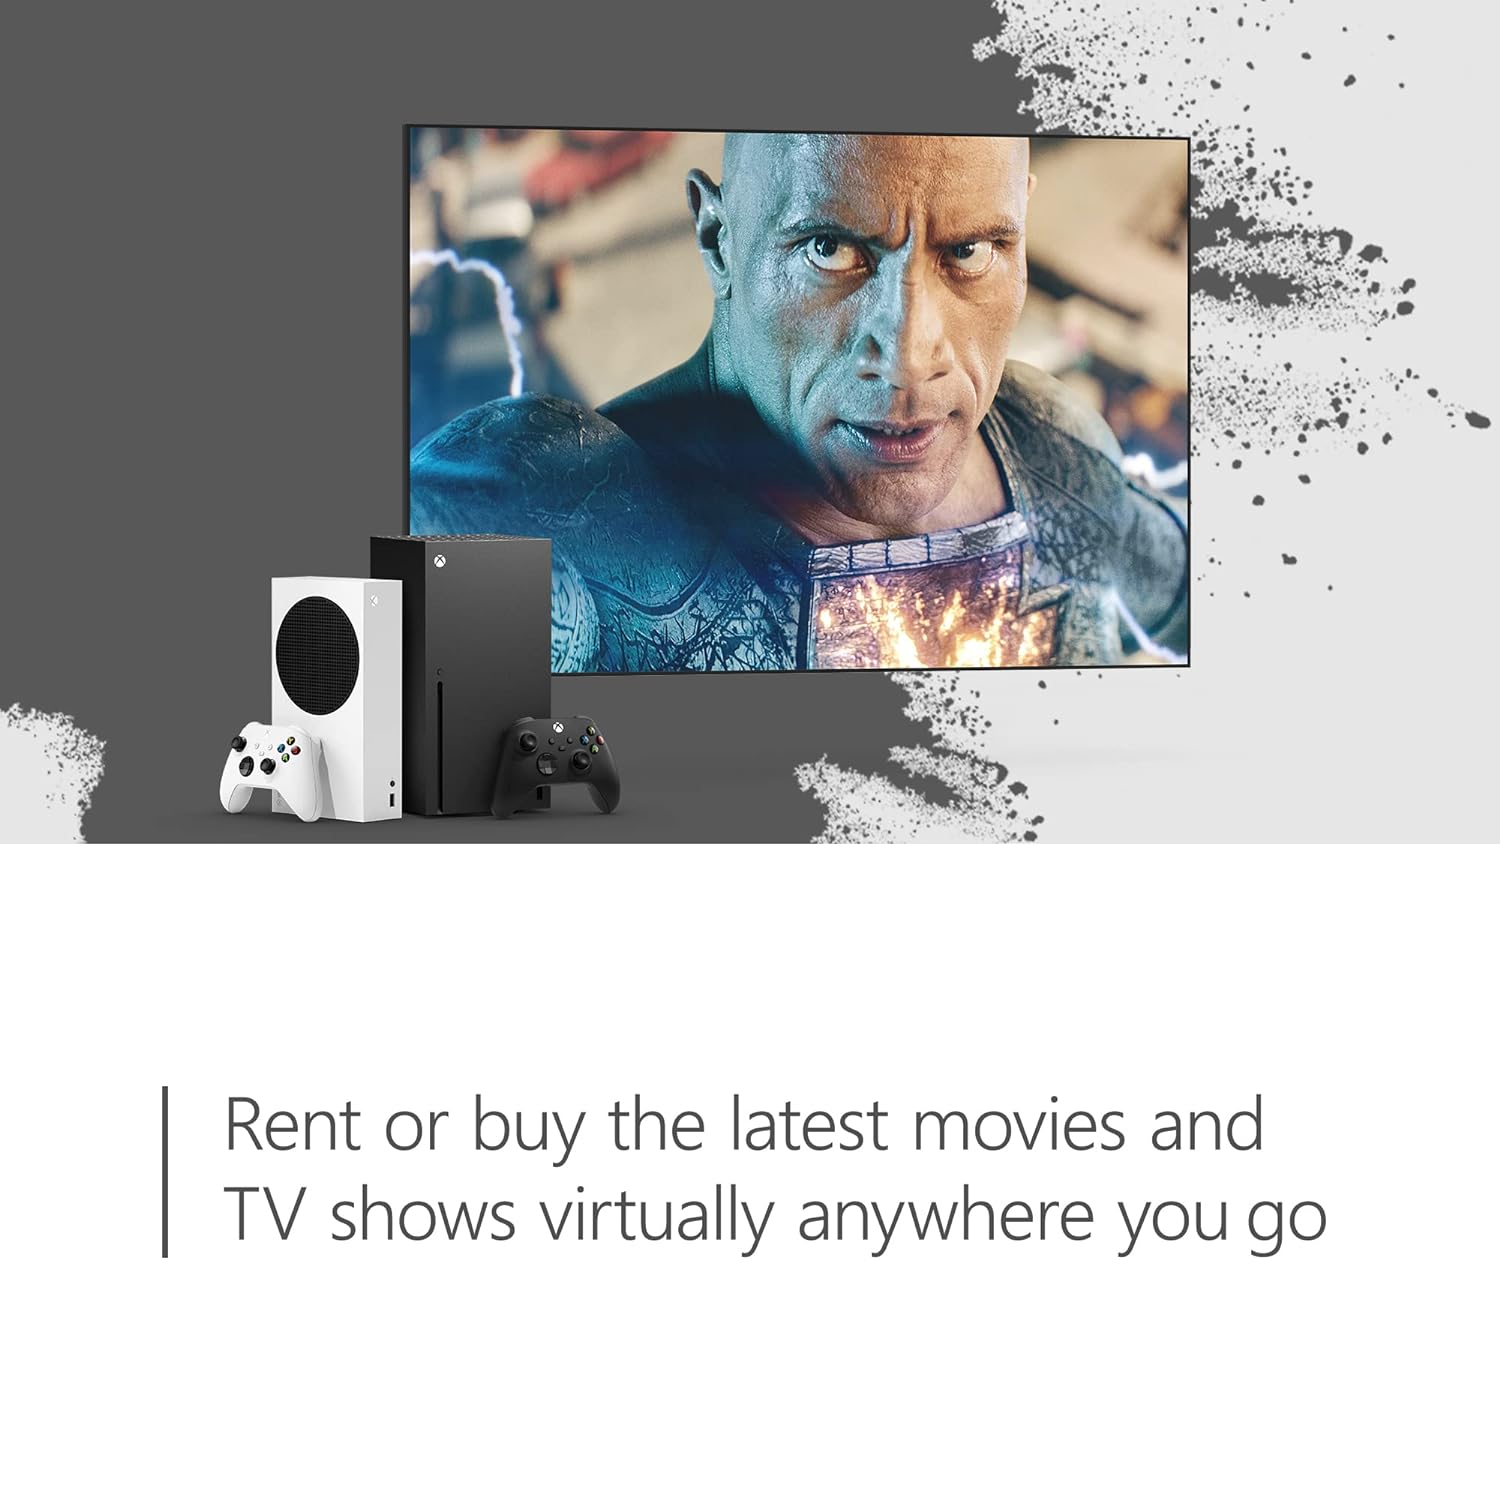 $15 Xbox Digital Gift Card | Rent or buy the latest movies and TV shows virtually anywhere you go.